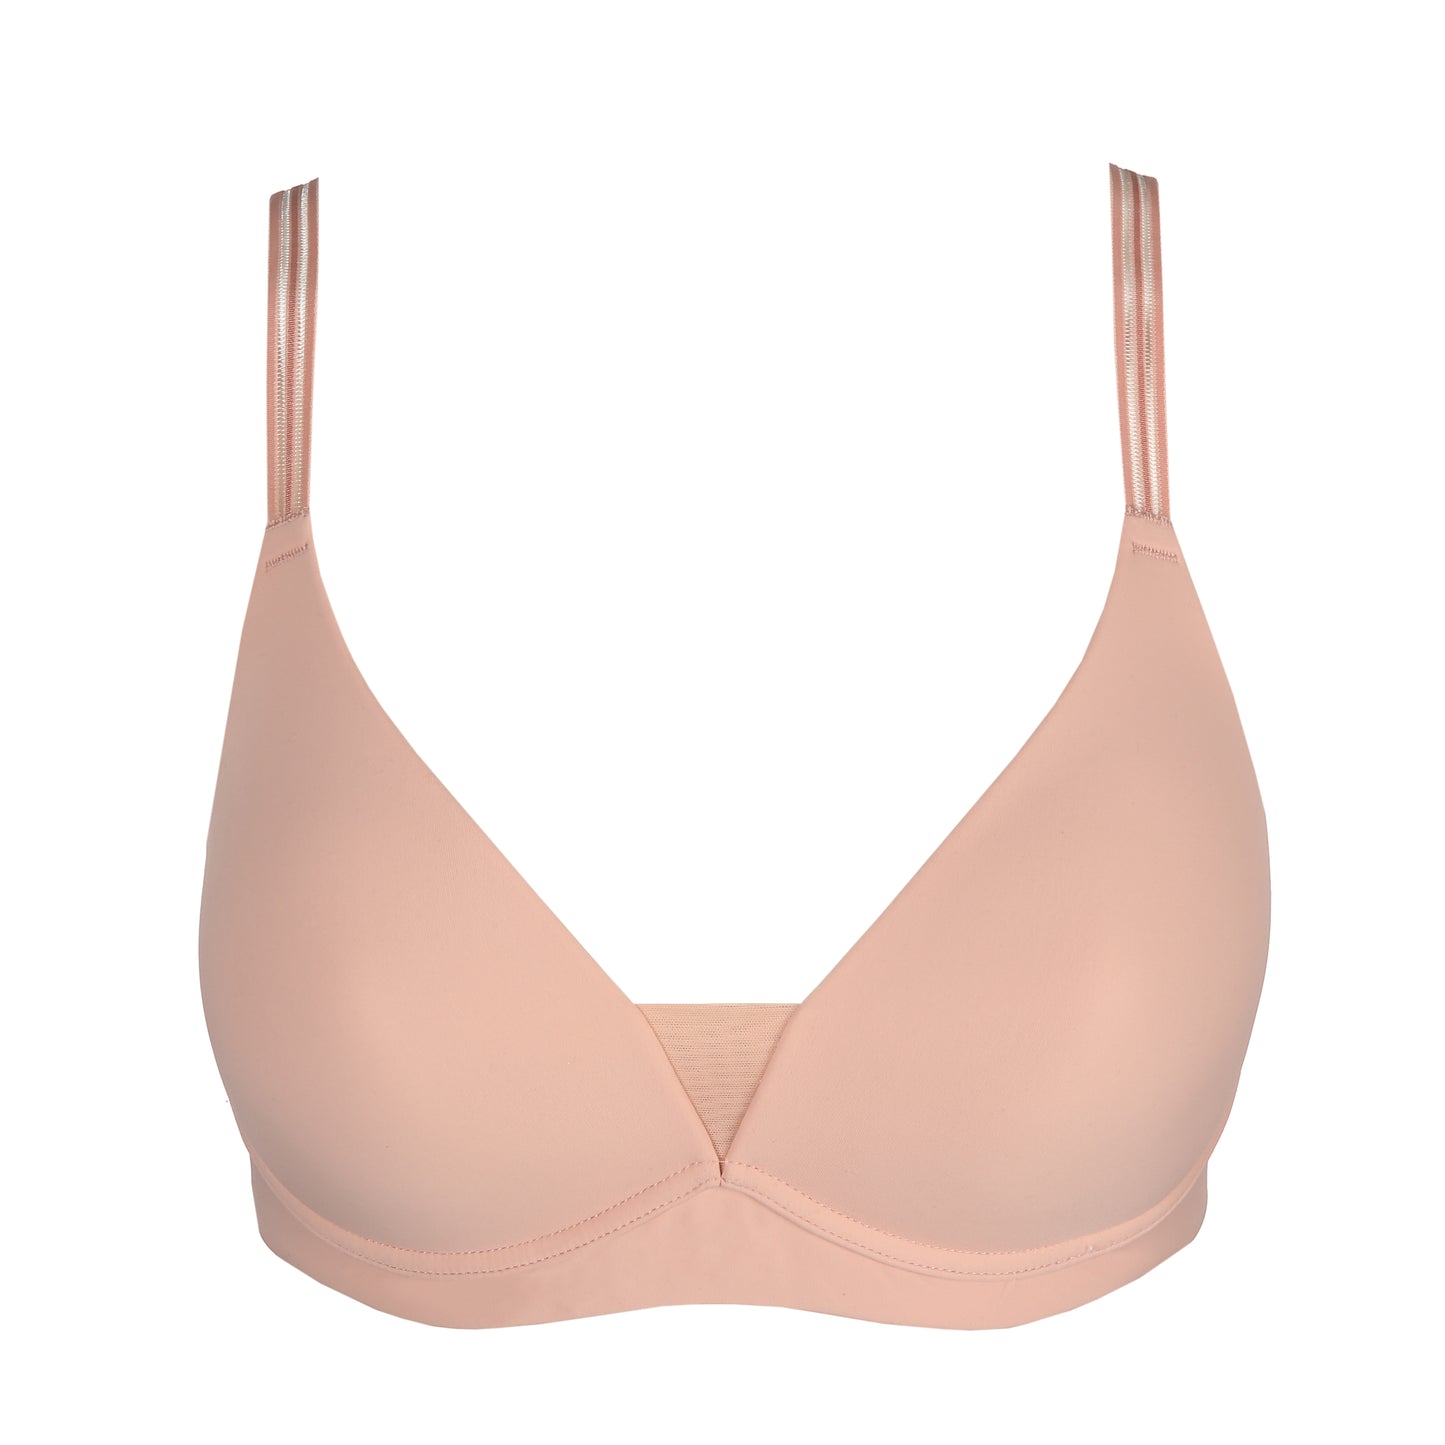 Marie Jo Louie volle cup bh zonder beugels Powder Rose